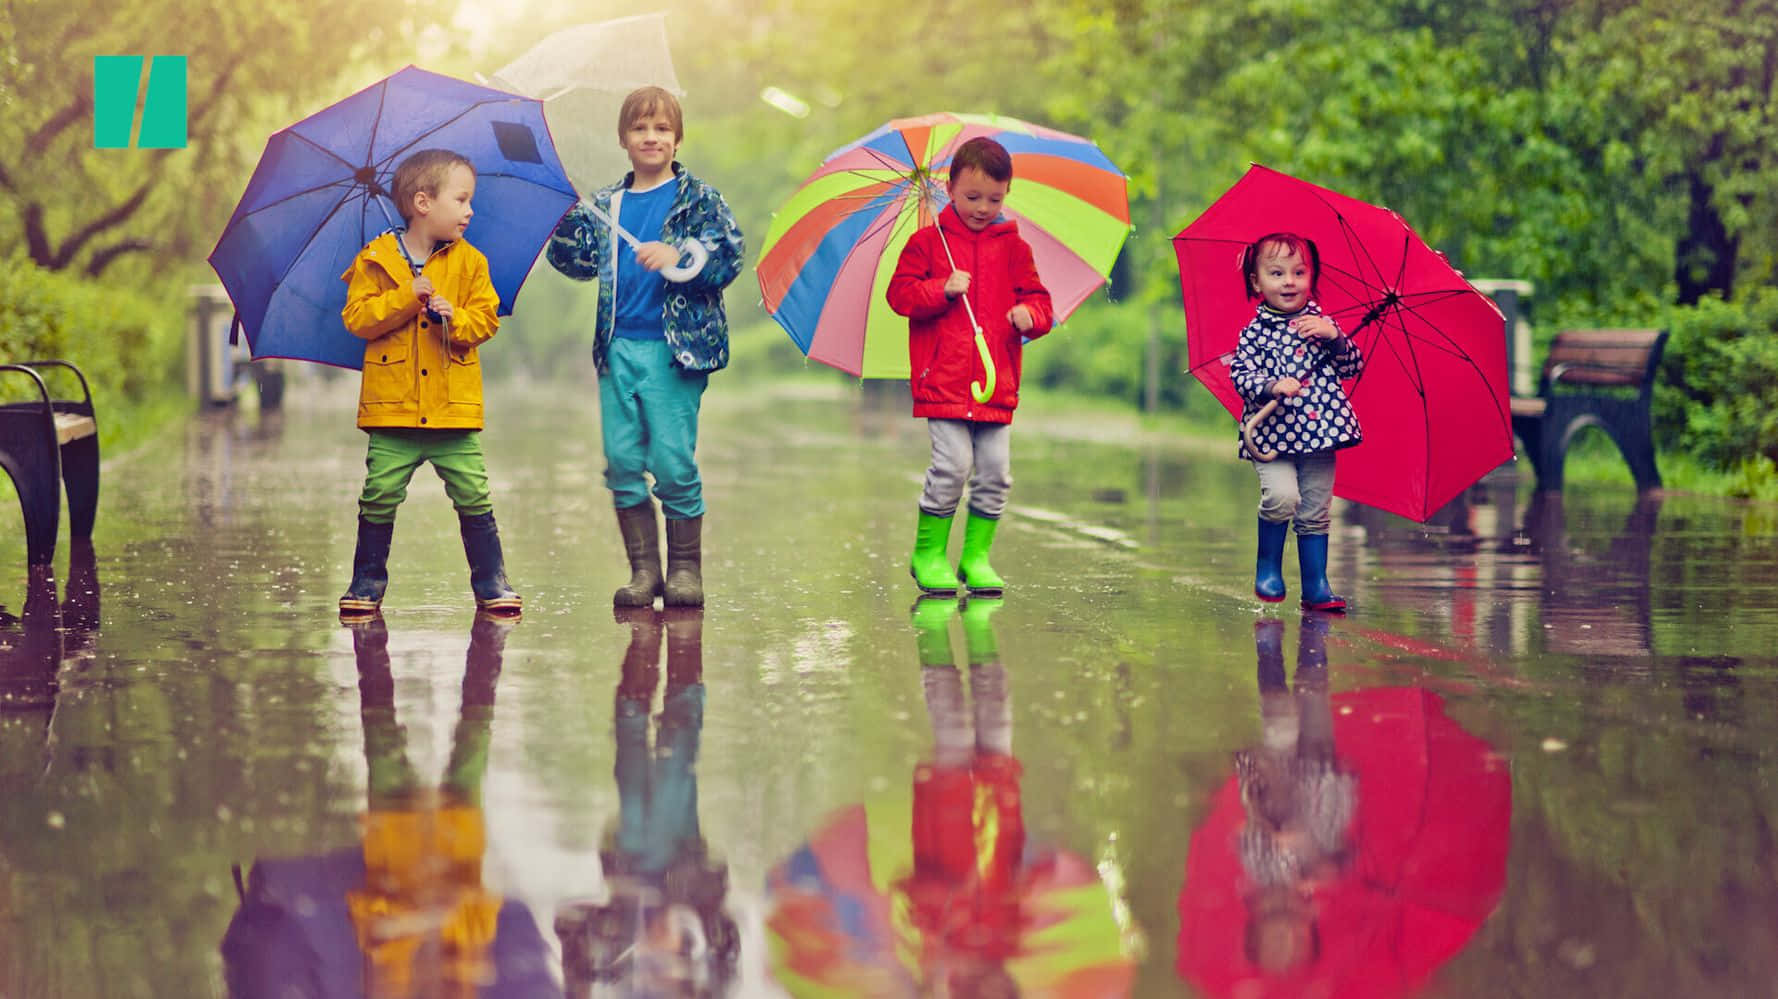 Children With Umbrellas During Rainy Day Picture